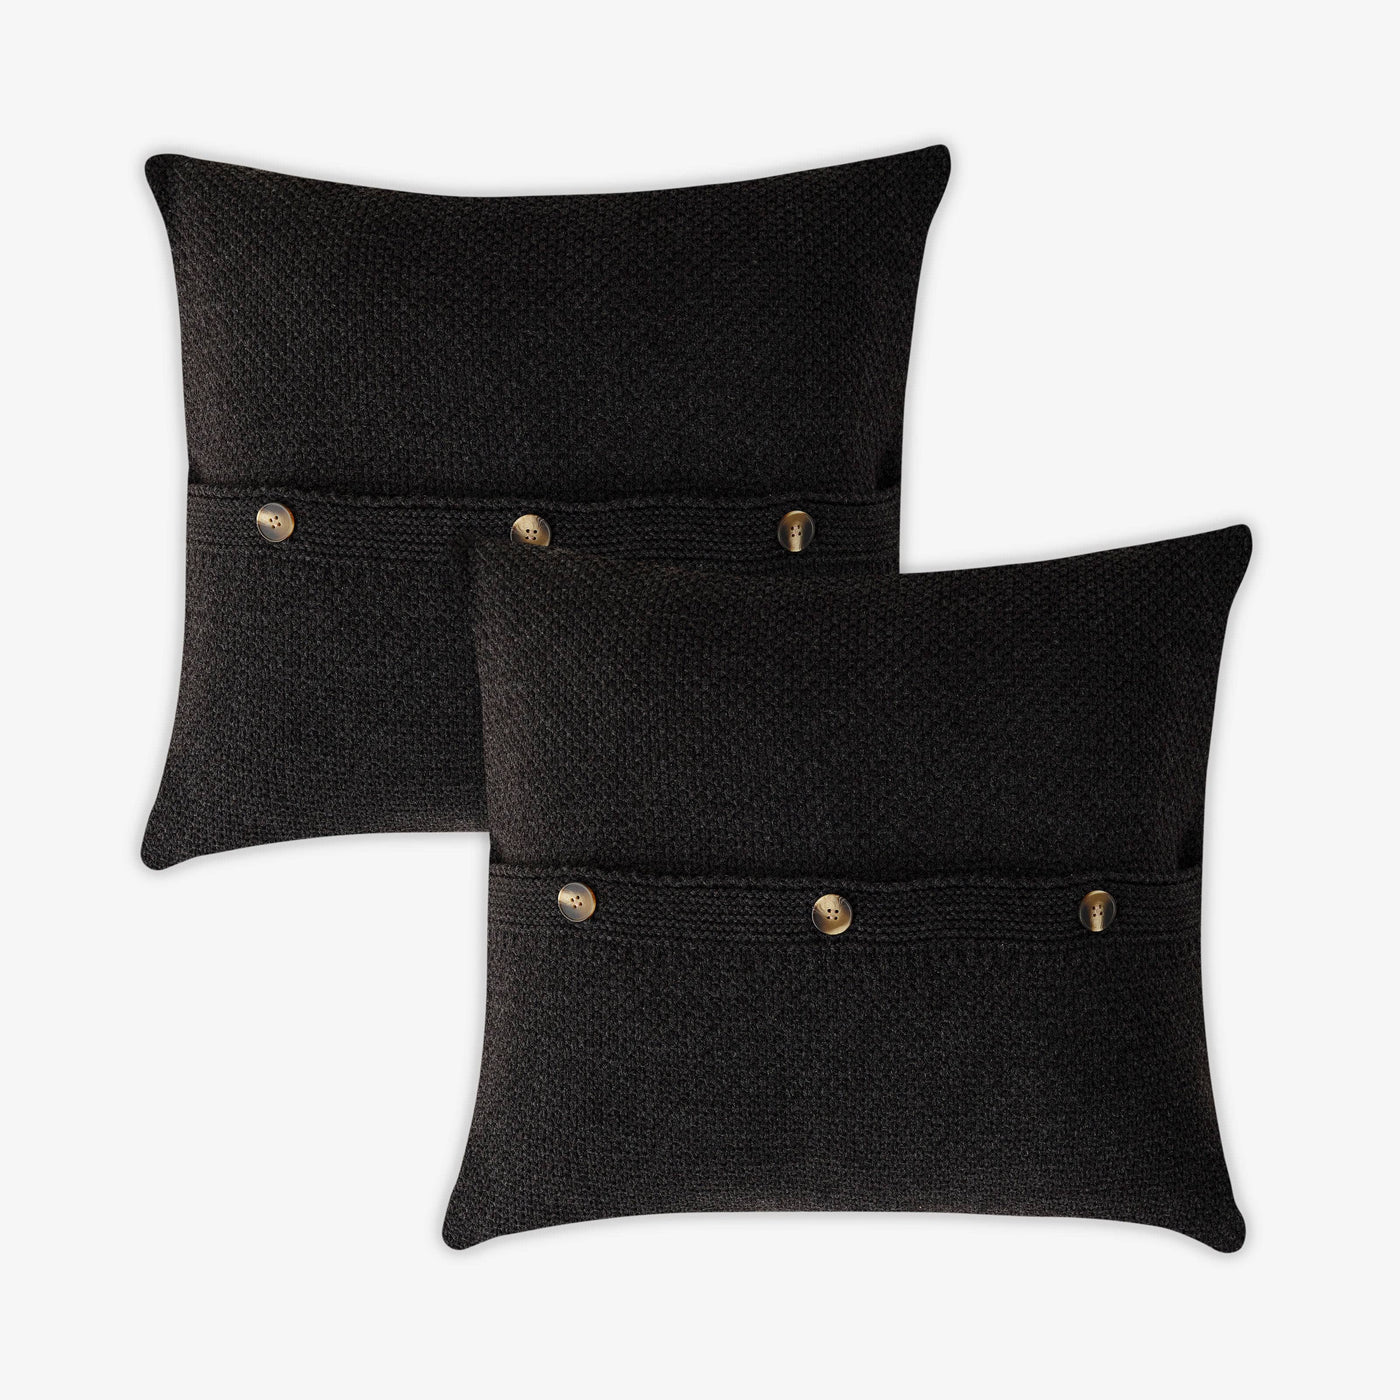 Benjamin Set of 2 Waffle Knitted Cushion Cover, Anthracite Grey, 45x45 cm 1